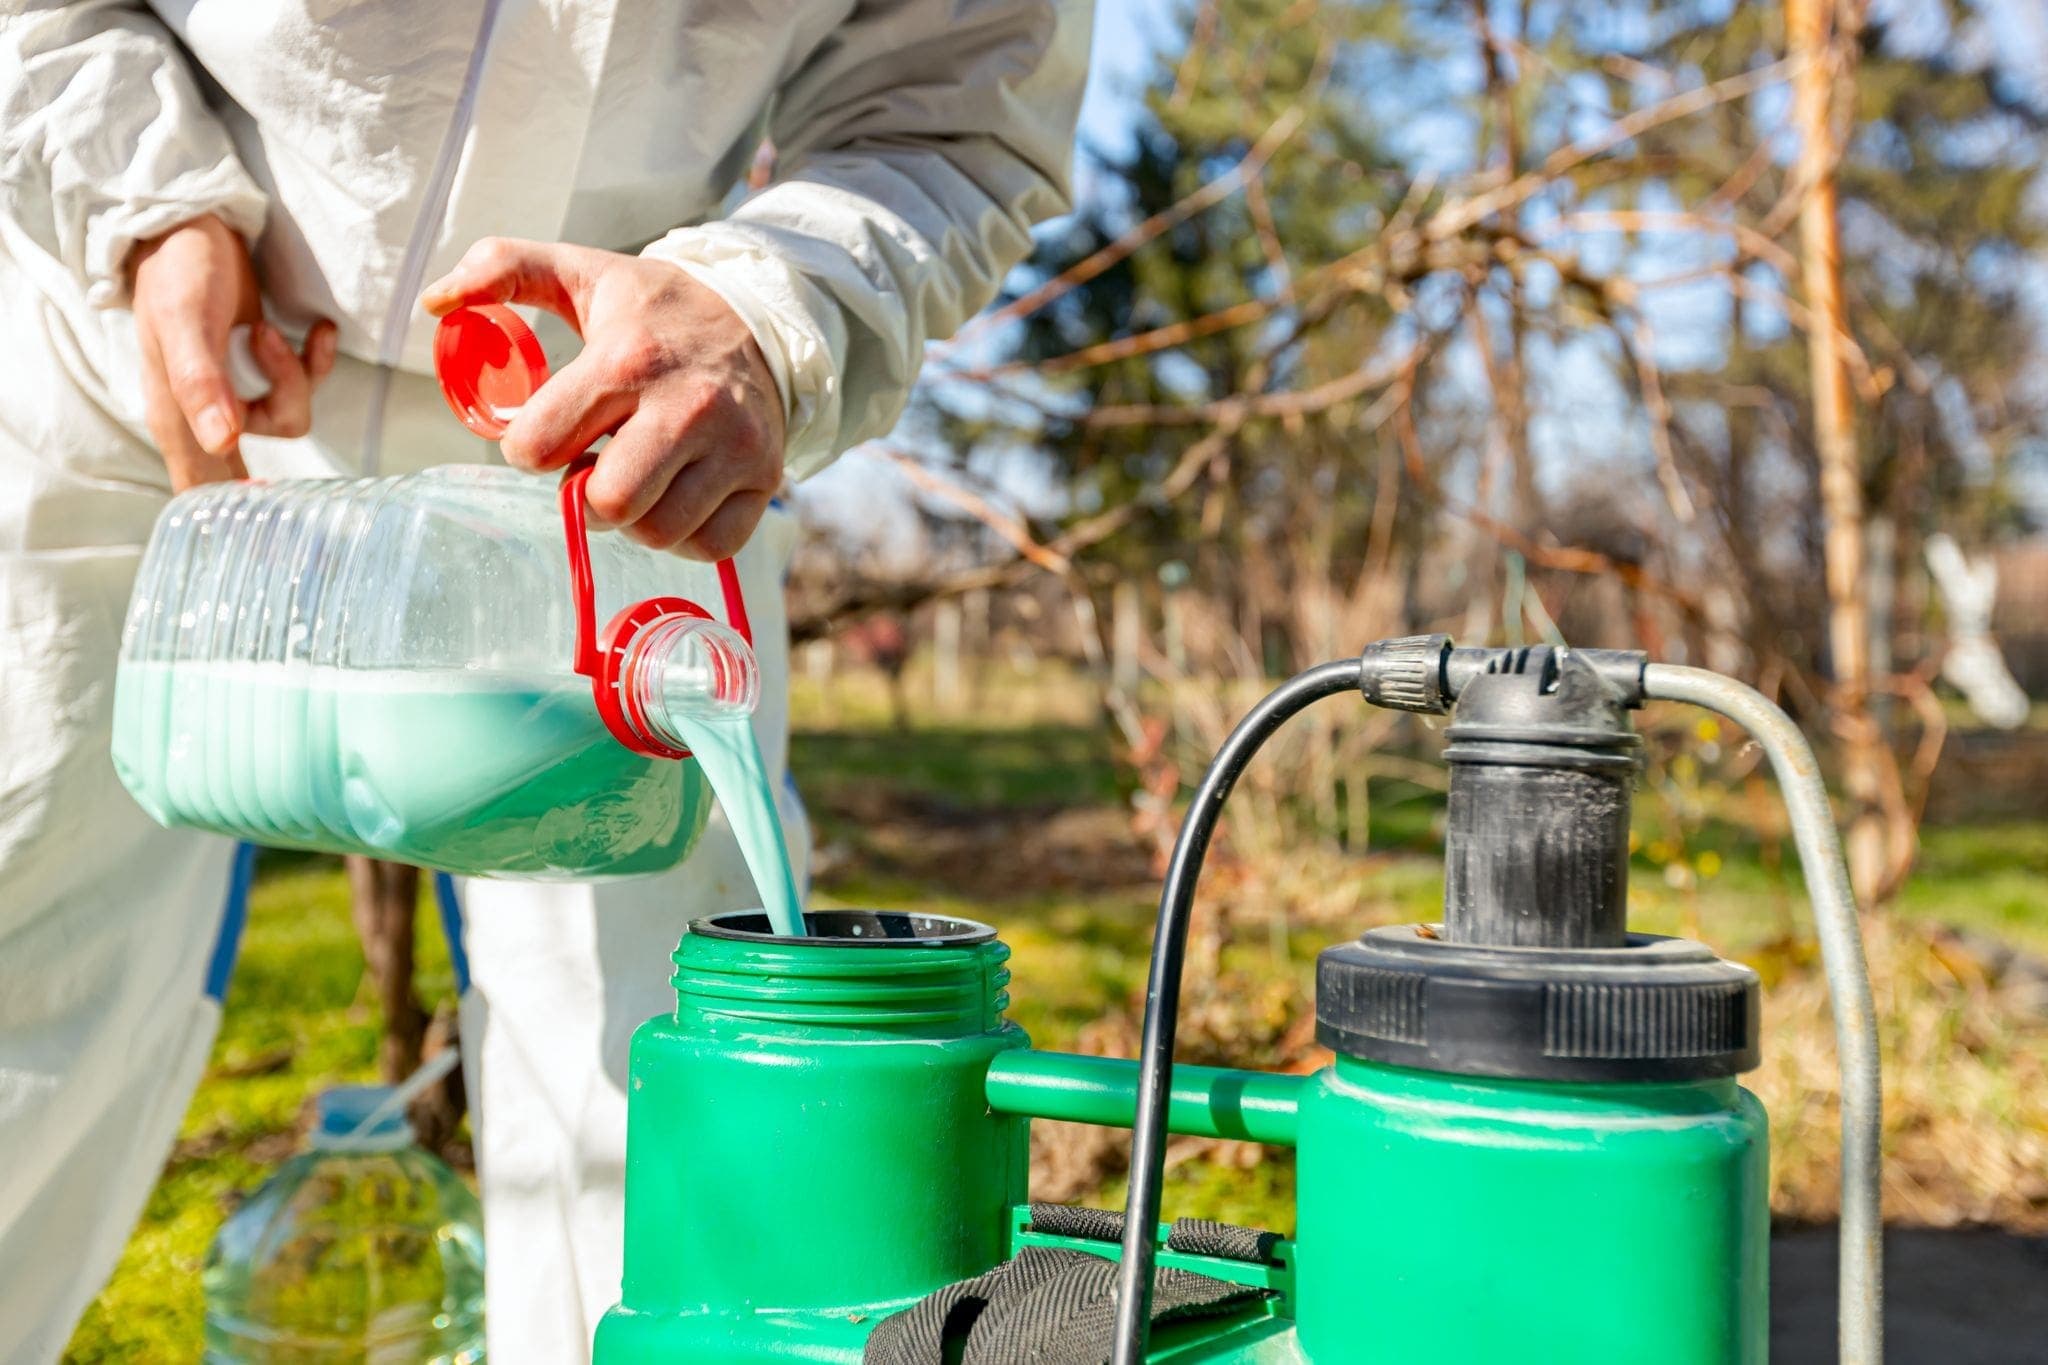 pouring leftover pesticides into storage containers